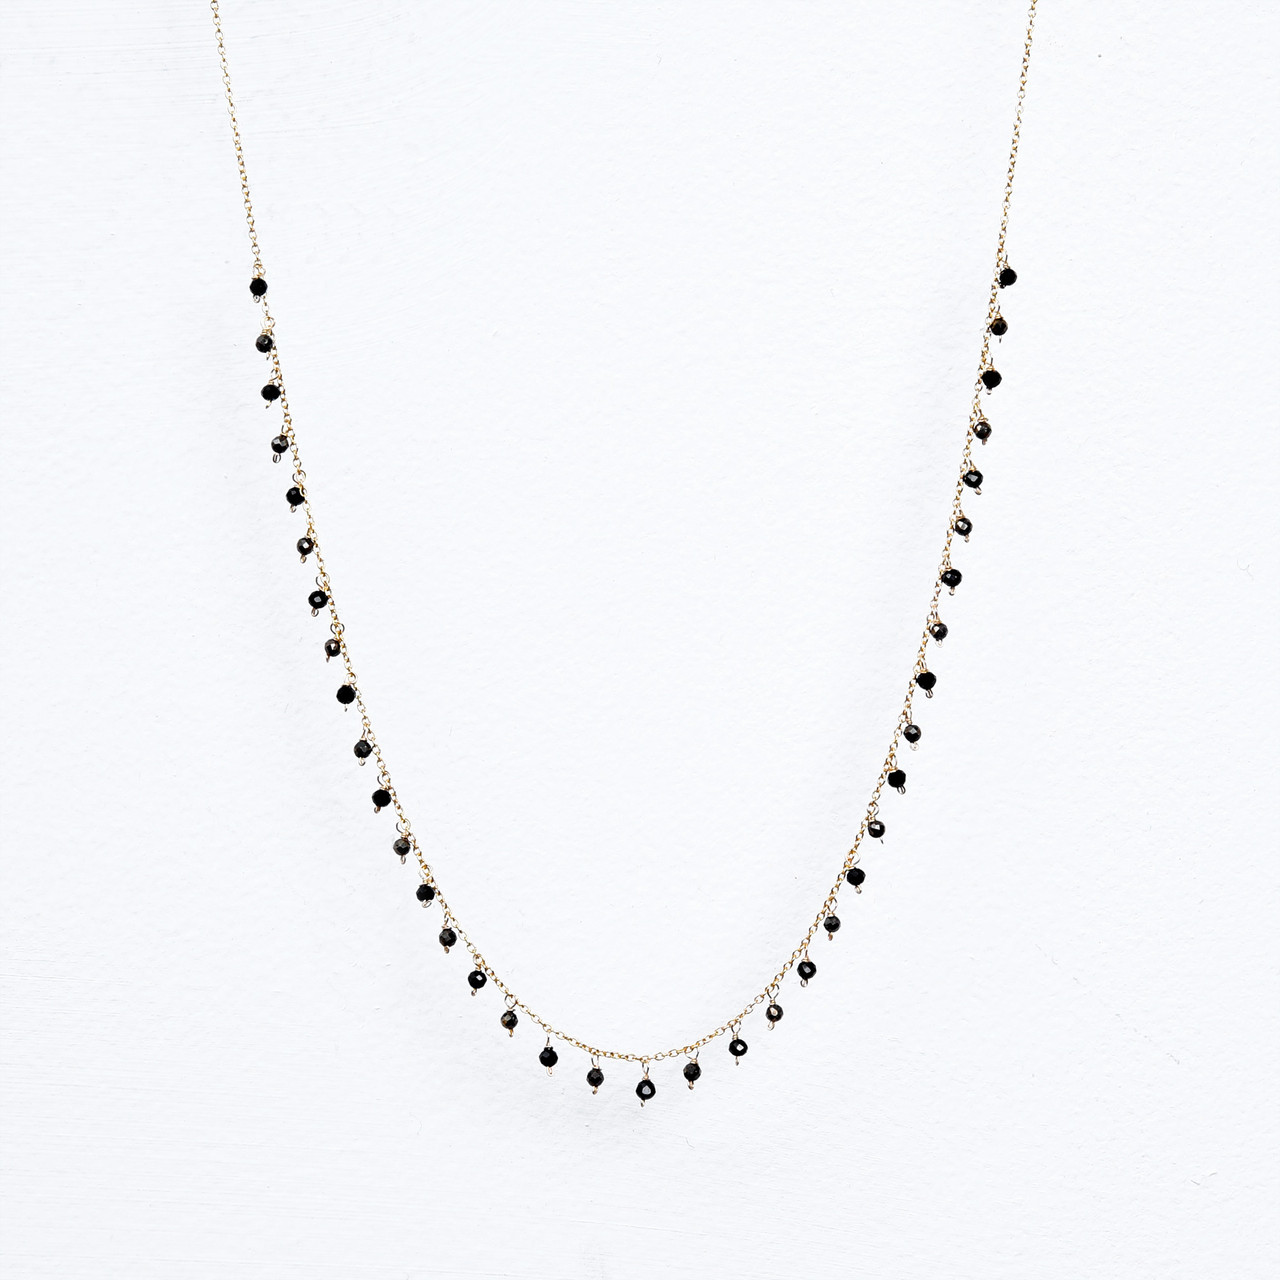 Buy Thai Black Spinel Beaded Multi Strand Necklace 18 Inches in Sterling  Silver 50.00 ctw at ShopLC.